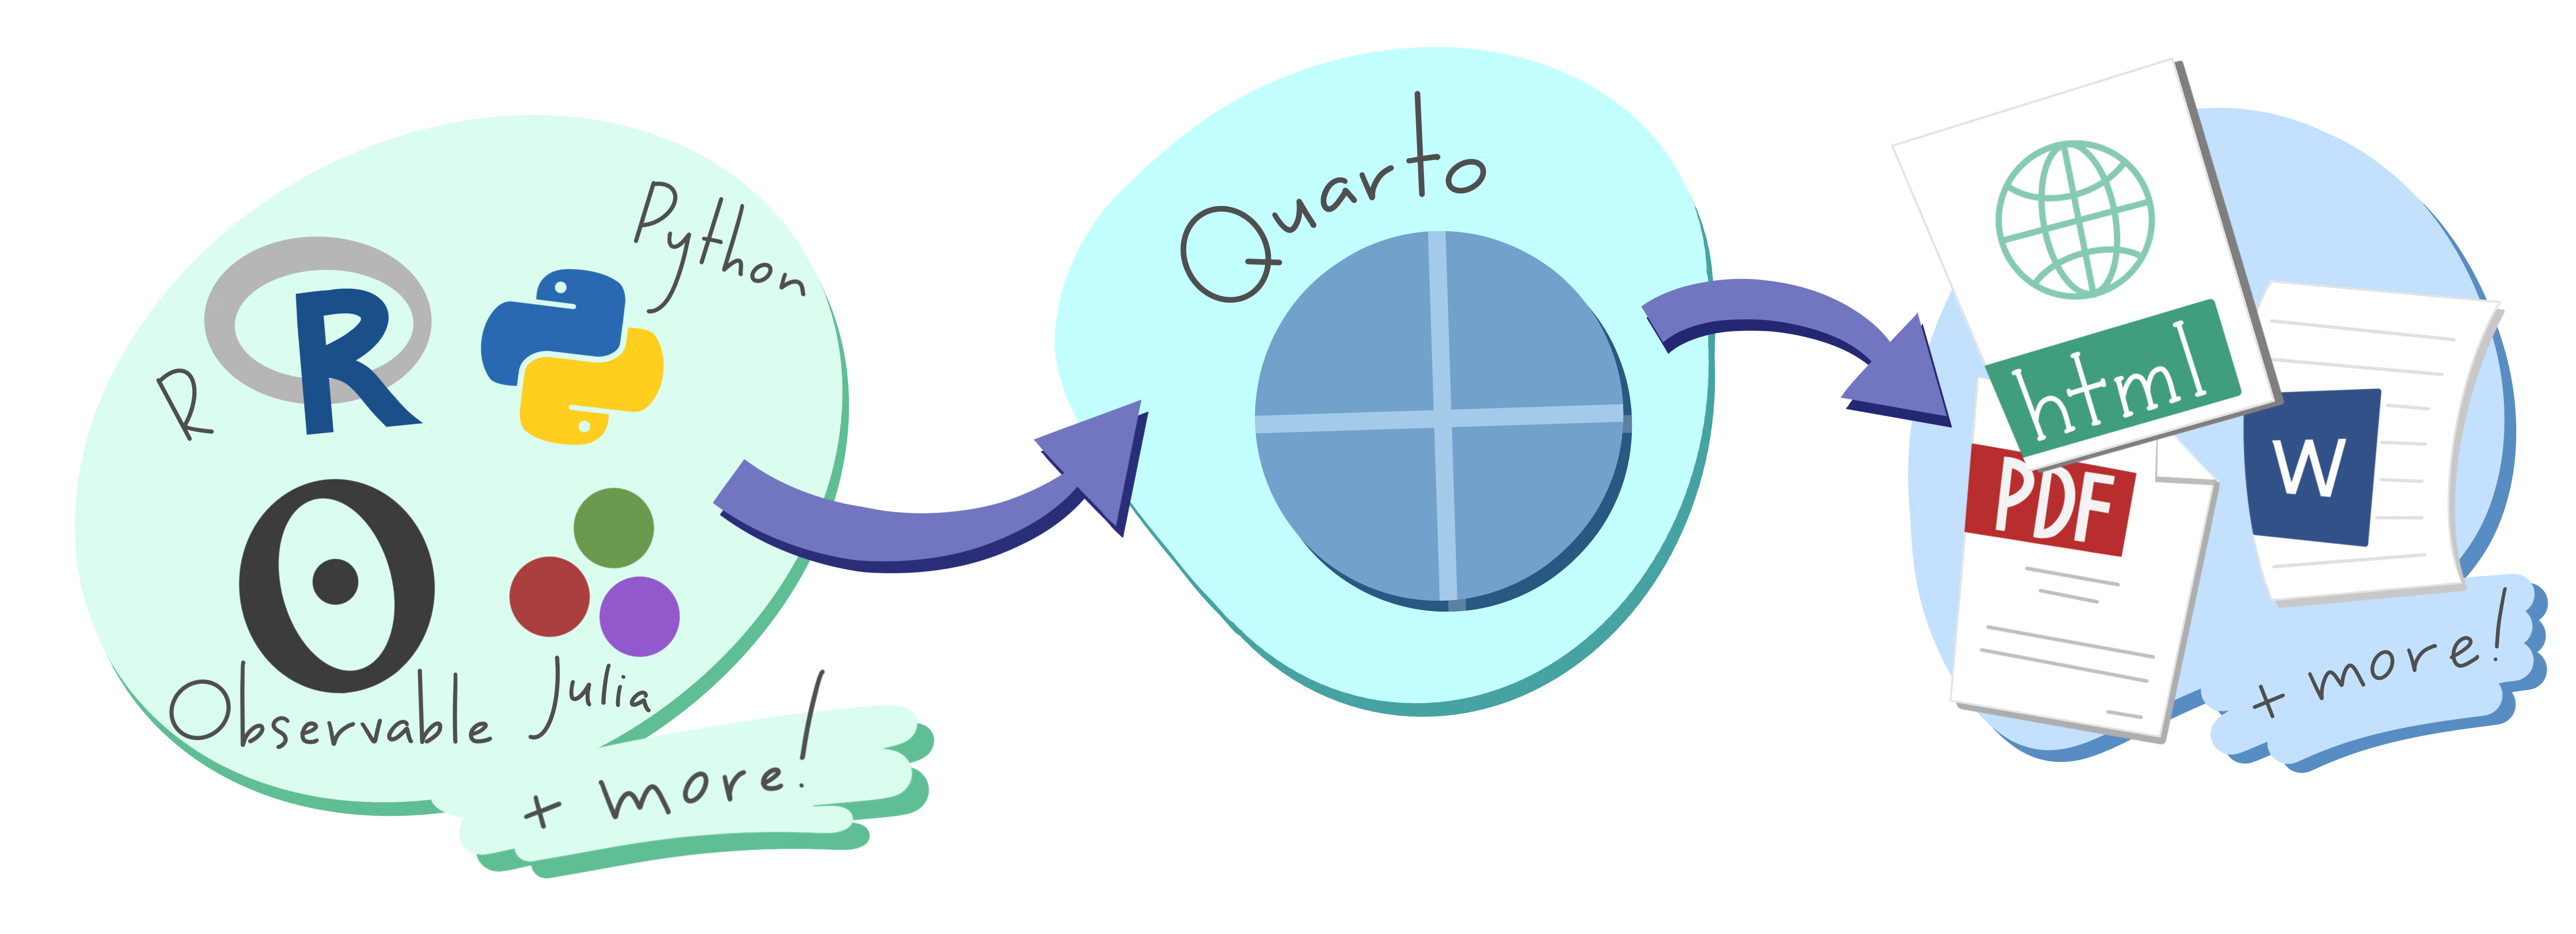 3 part illustration left-to-right that starts with R, Python, Julia, Observable and more pointing to Quarto and then pointing to html, pdf, and word documents